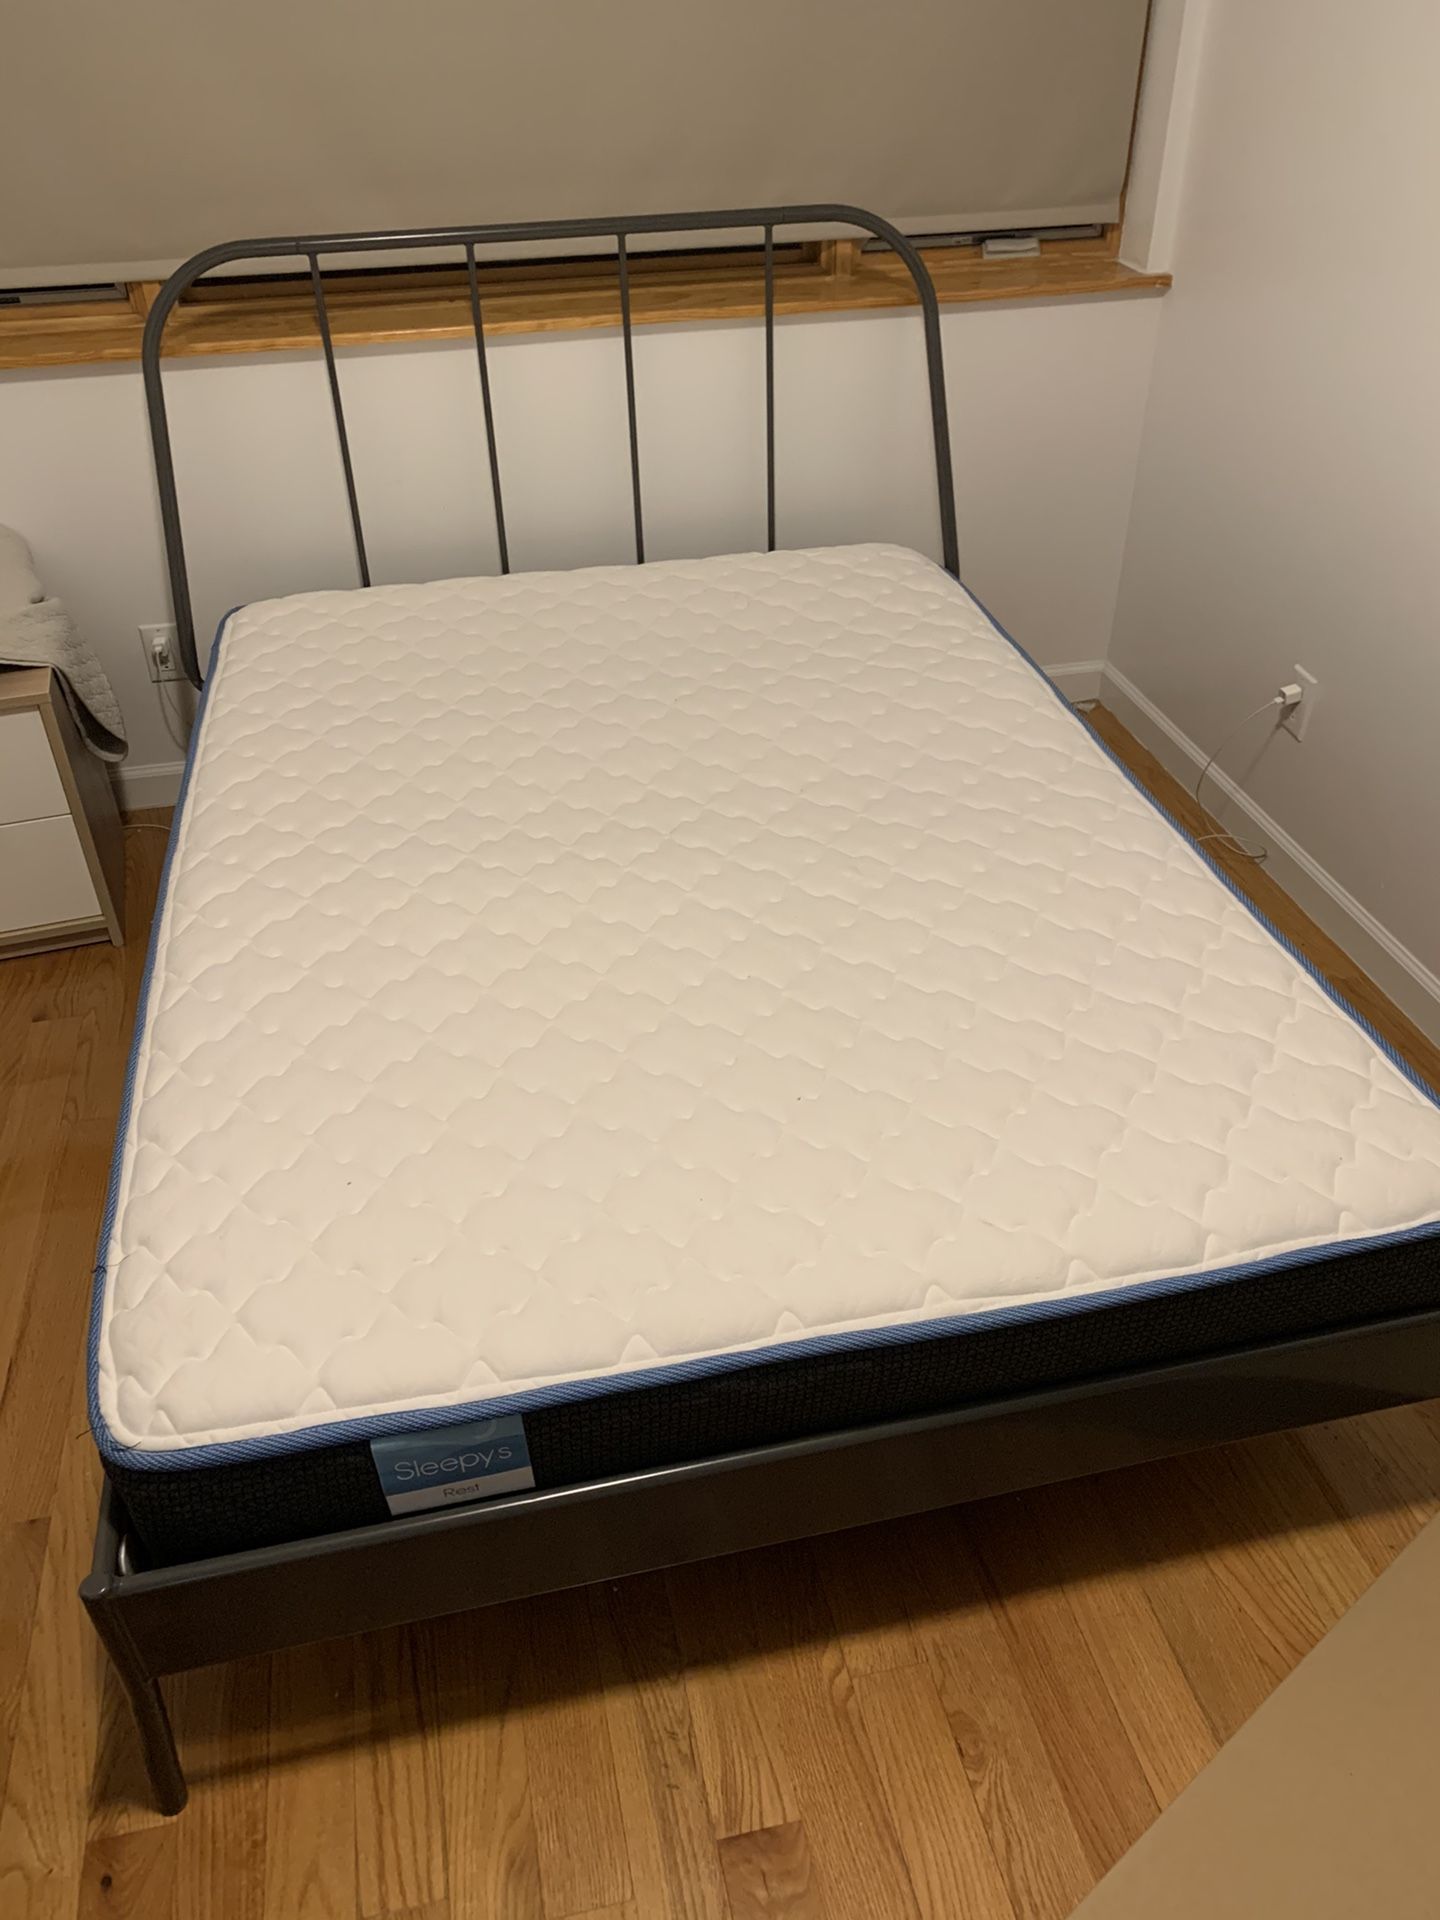 FULL SIZE BED FRAME AND AND MATTRESS- BOTH IN GREAT CONDITION